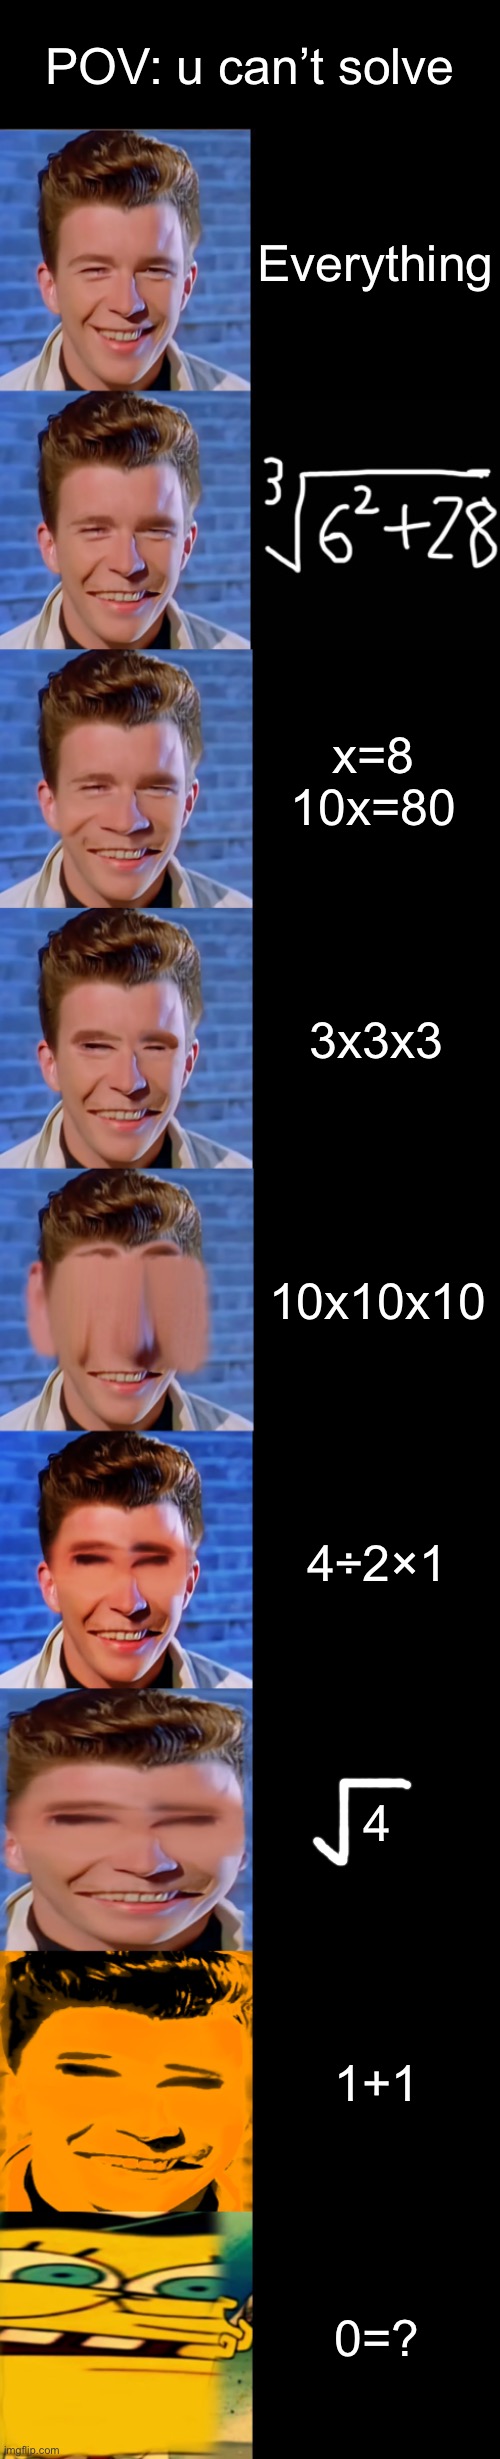 Rick astley becoming idiot | POV: u can’t solve; Everything; x=8 10x=80; 3x3x3; 10x10x10; 4÷2×1; 4; 1+1; 0=? | image tagged in rick astley becoming idiot | made w/ Imgflip meme maker